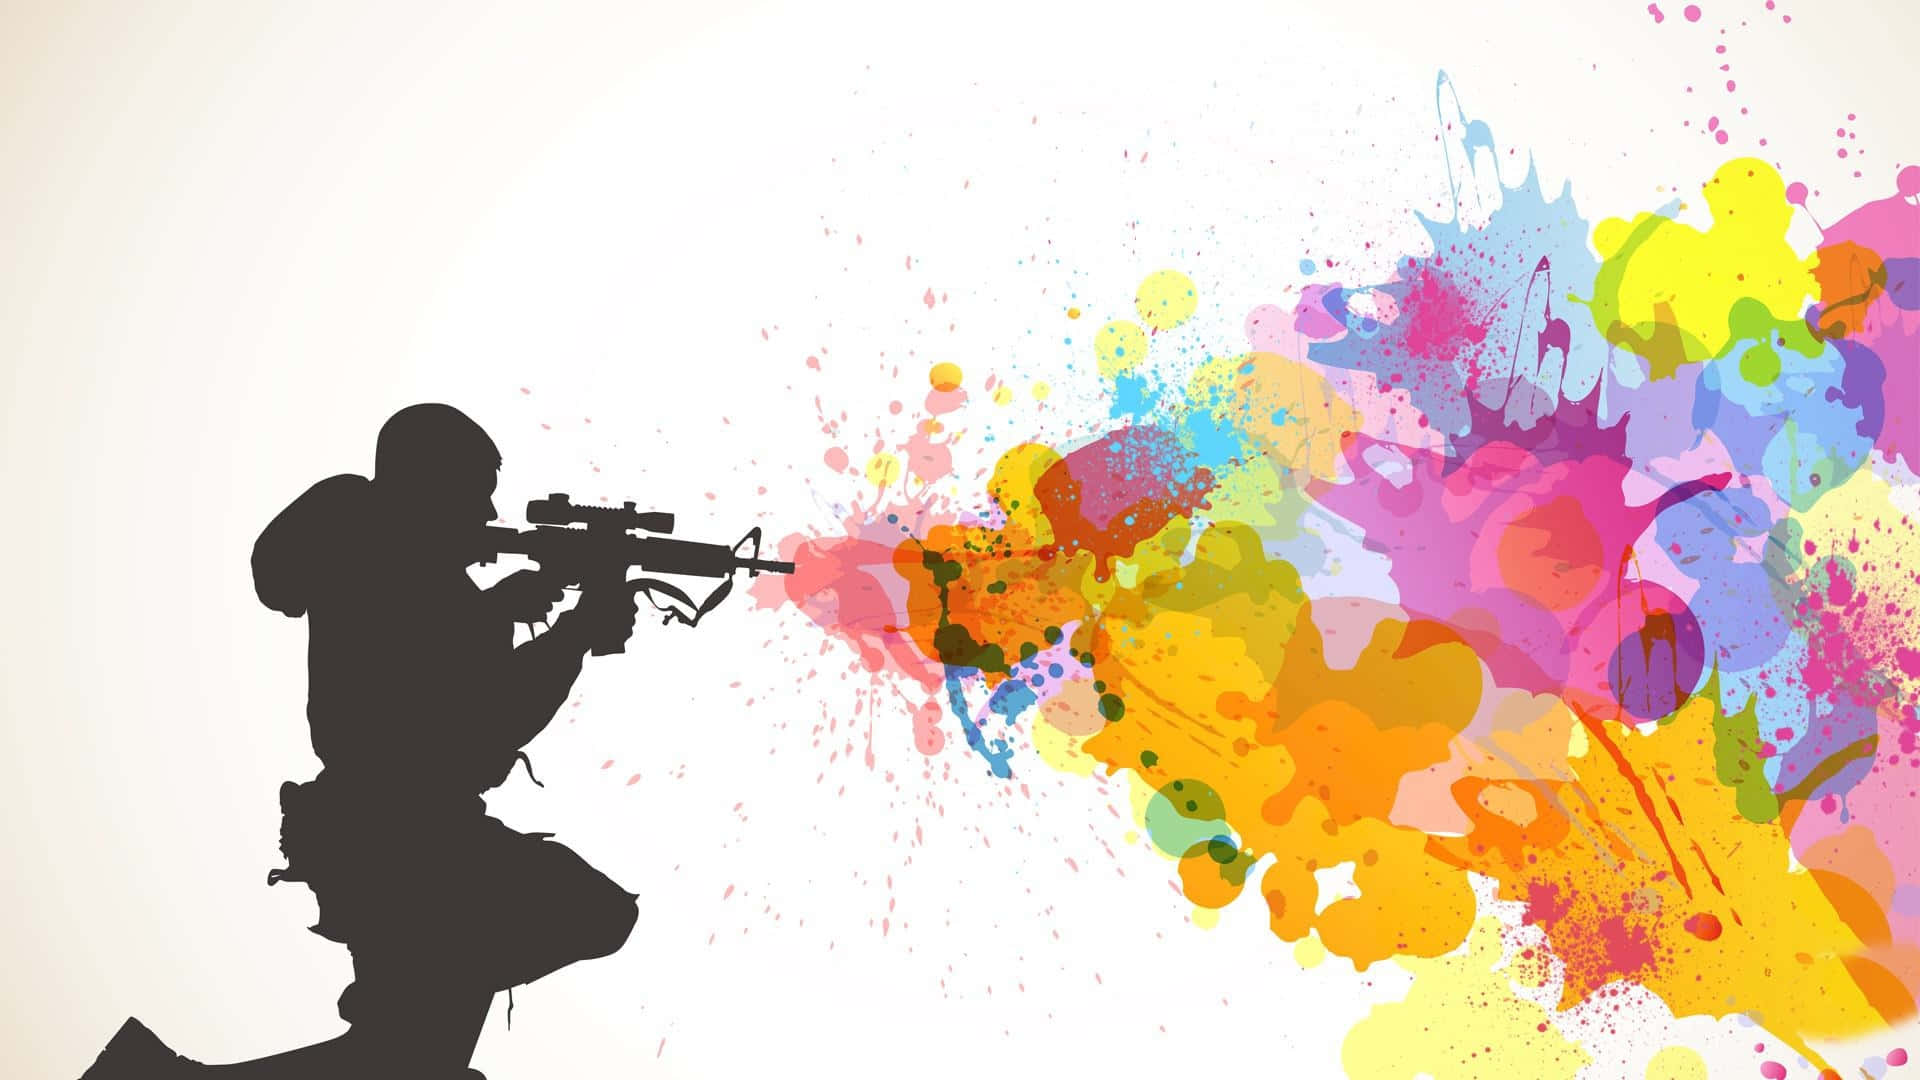 A Silhouette Of A Man Shooting A Gun With Colorful Paint